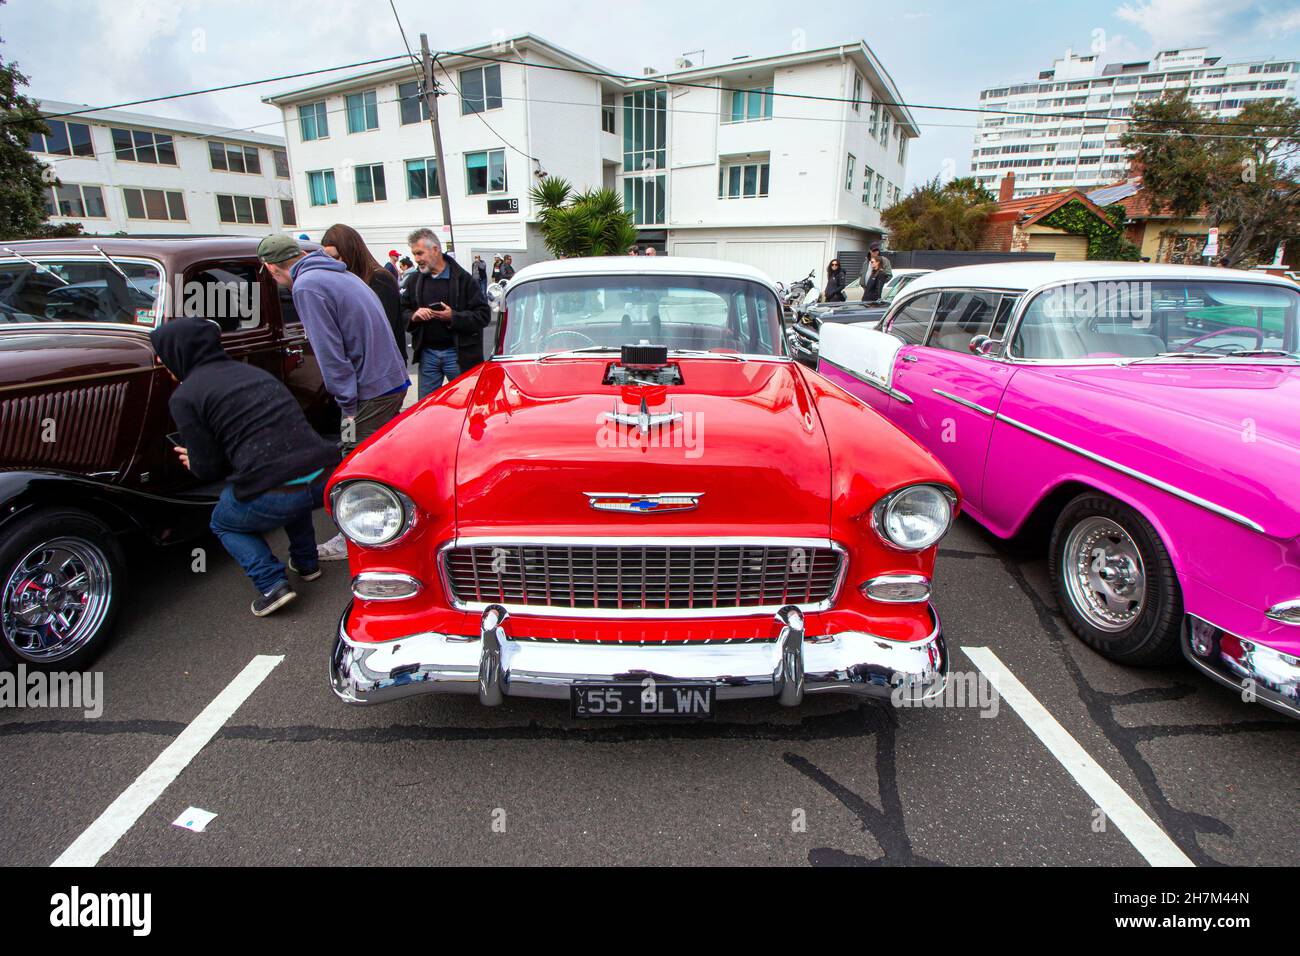 Red Chevrolet colourful classic car parked in a street, a white building in the back, some people around. St Kilda car show on fathers day. Melbourne, Stock Photo